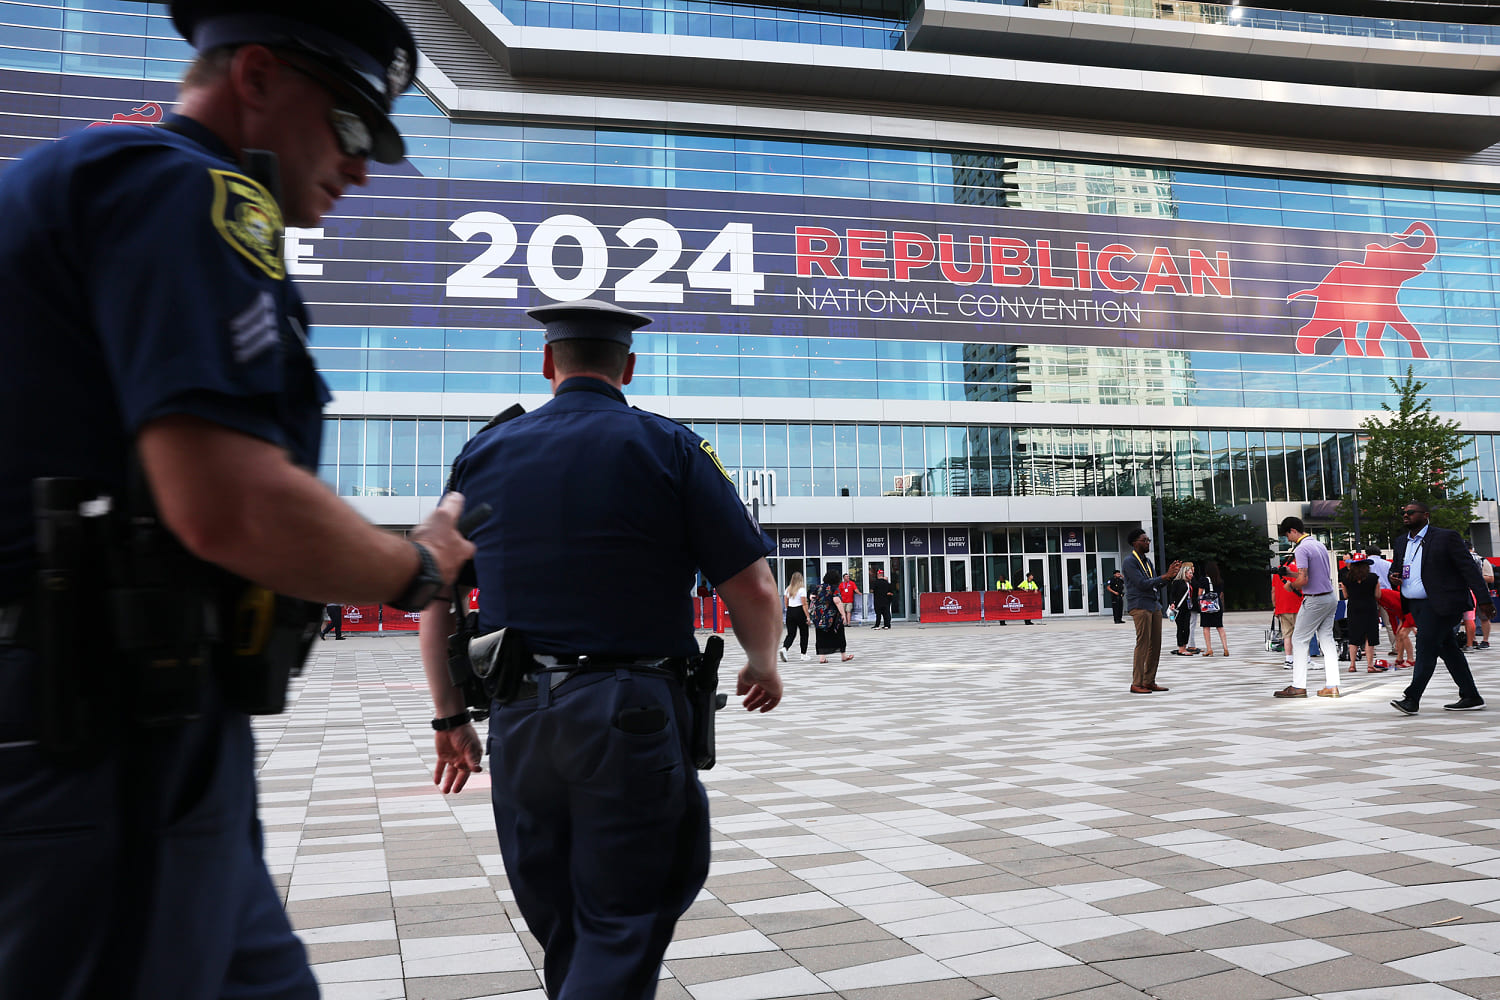 Man with gun in backpack arrested near Republican National Convention